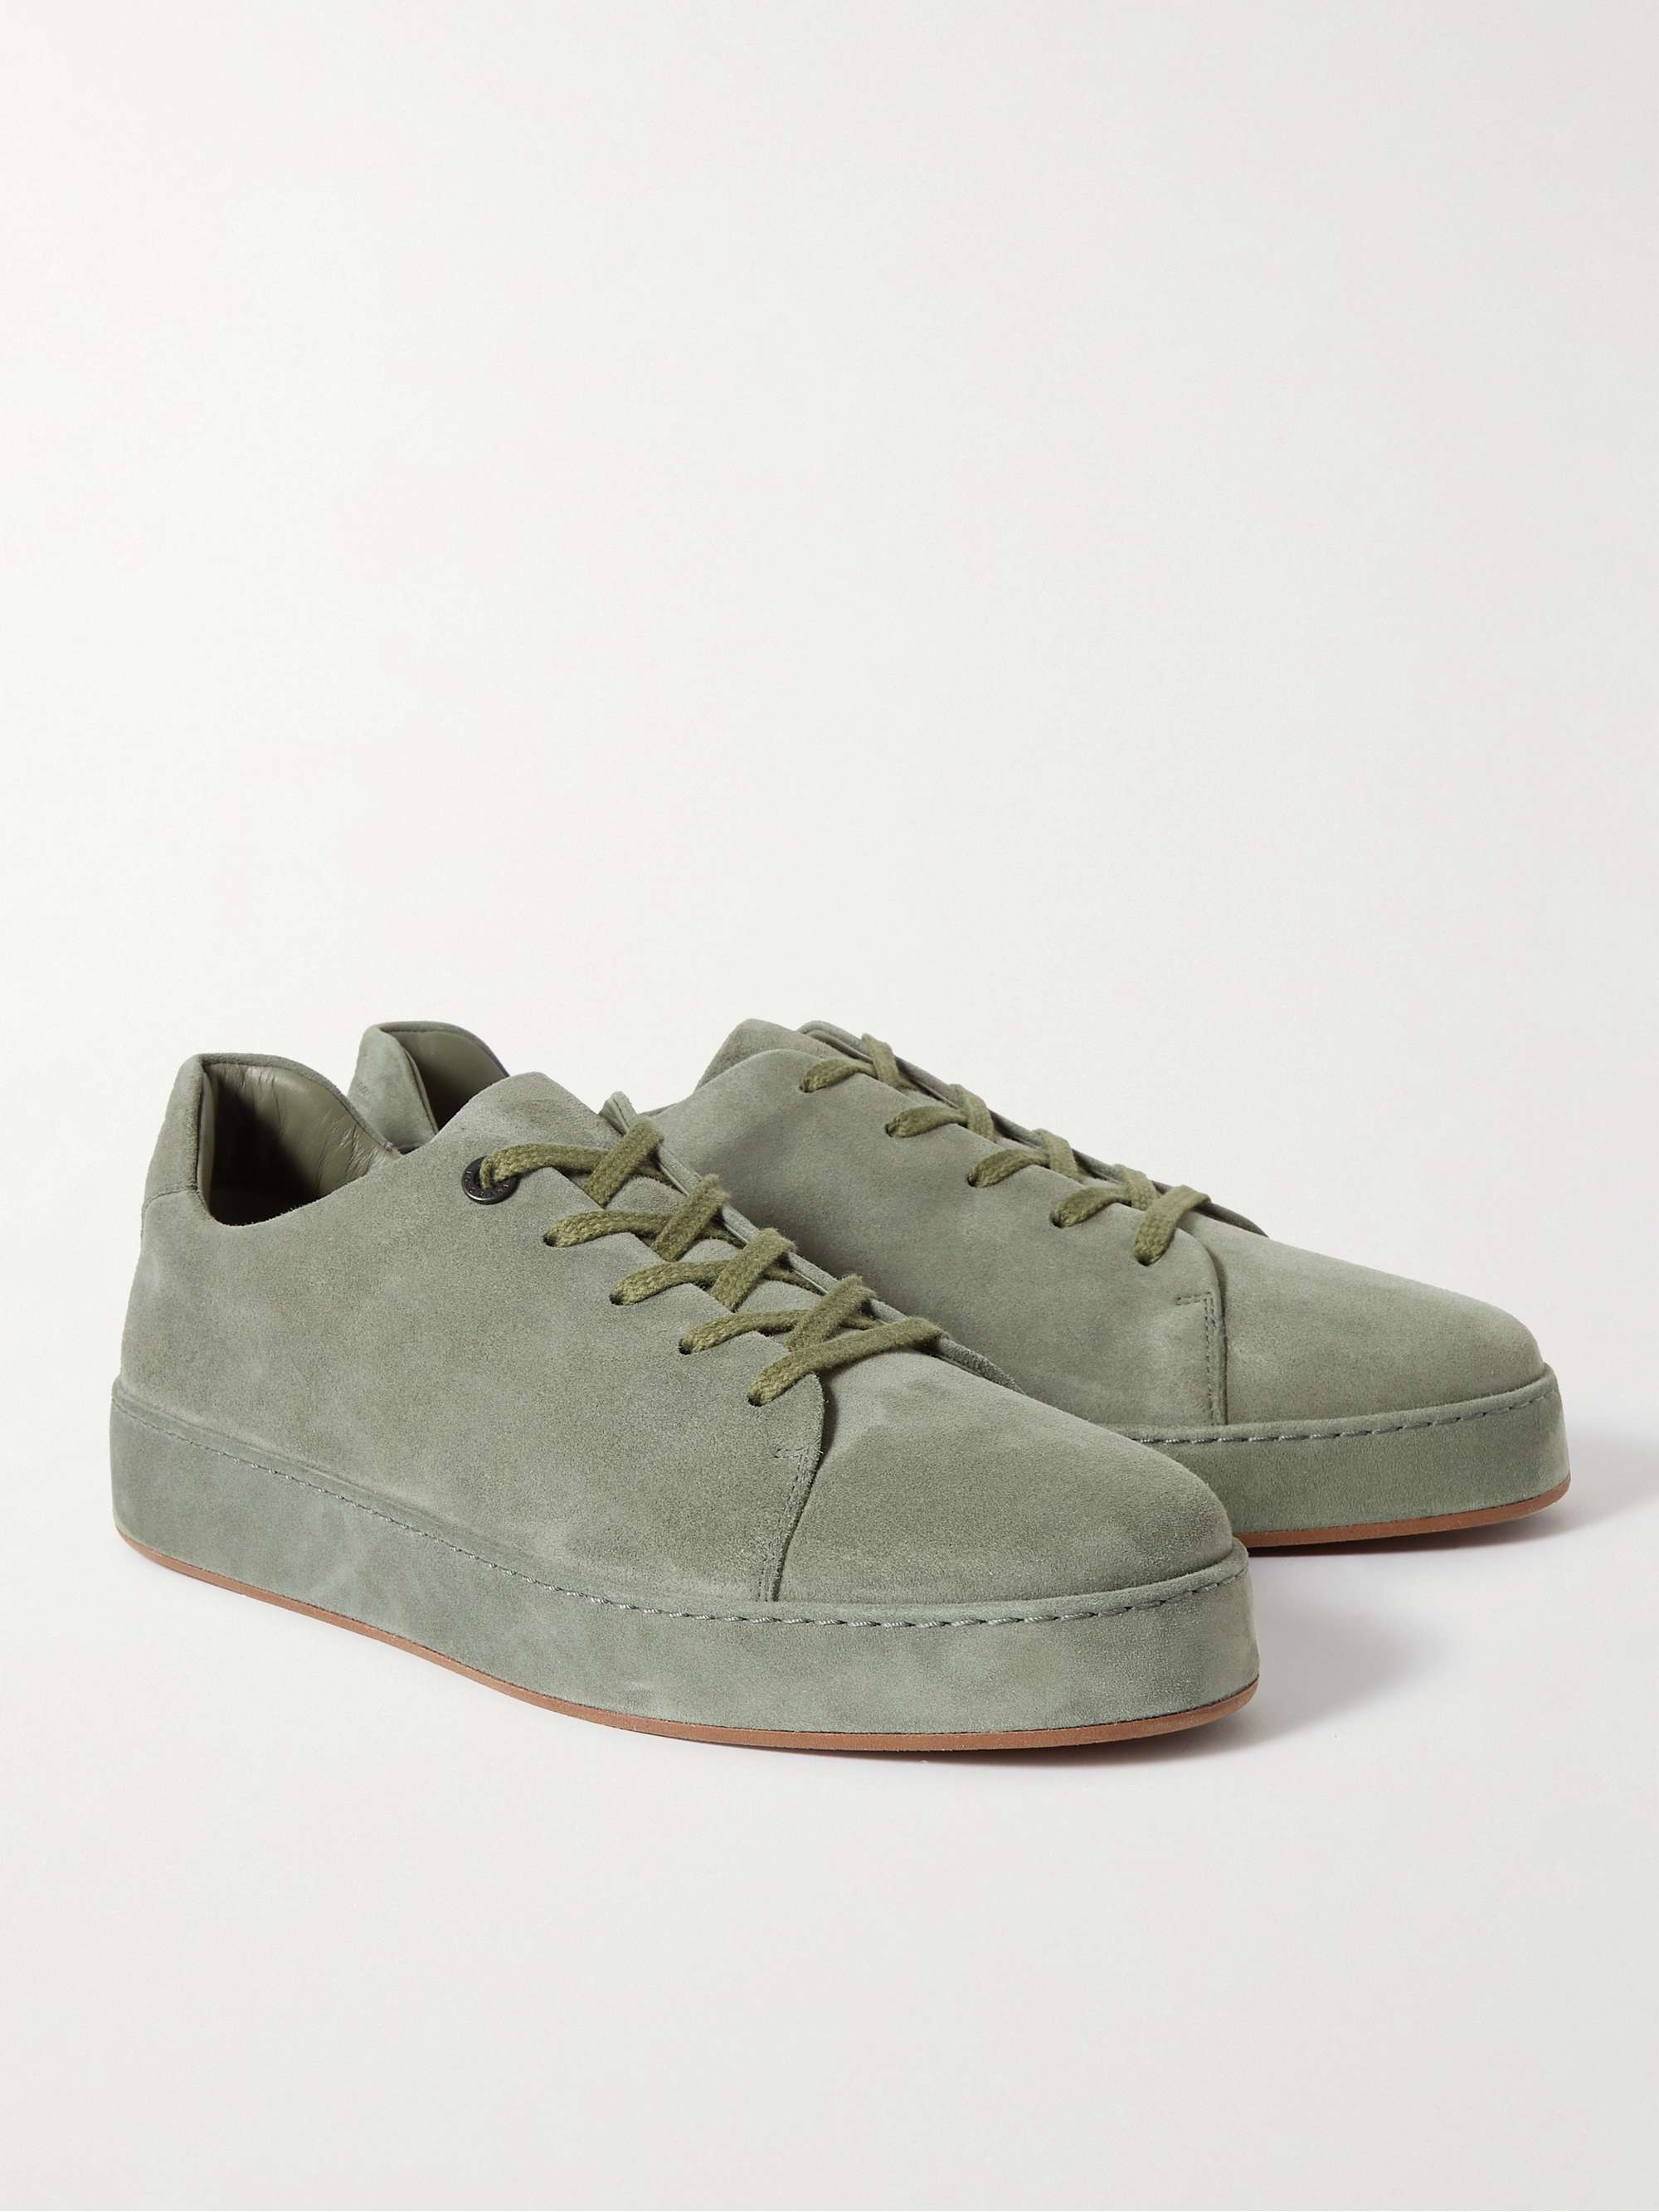 LORO PIANA Nuages Suede Sneakers